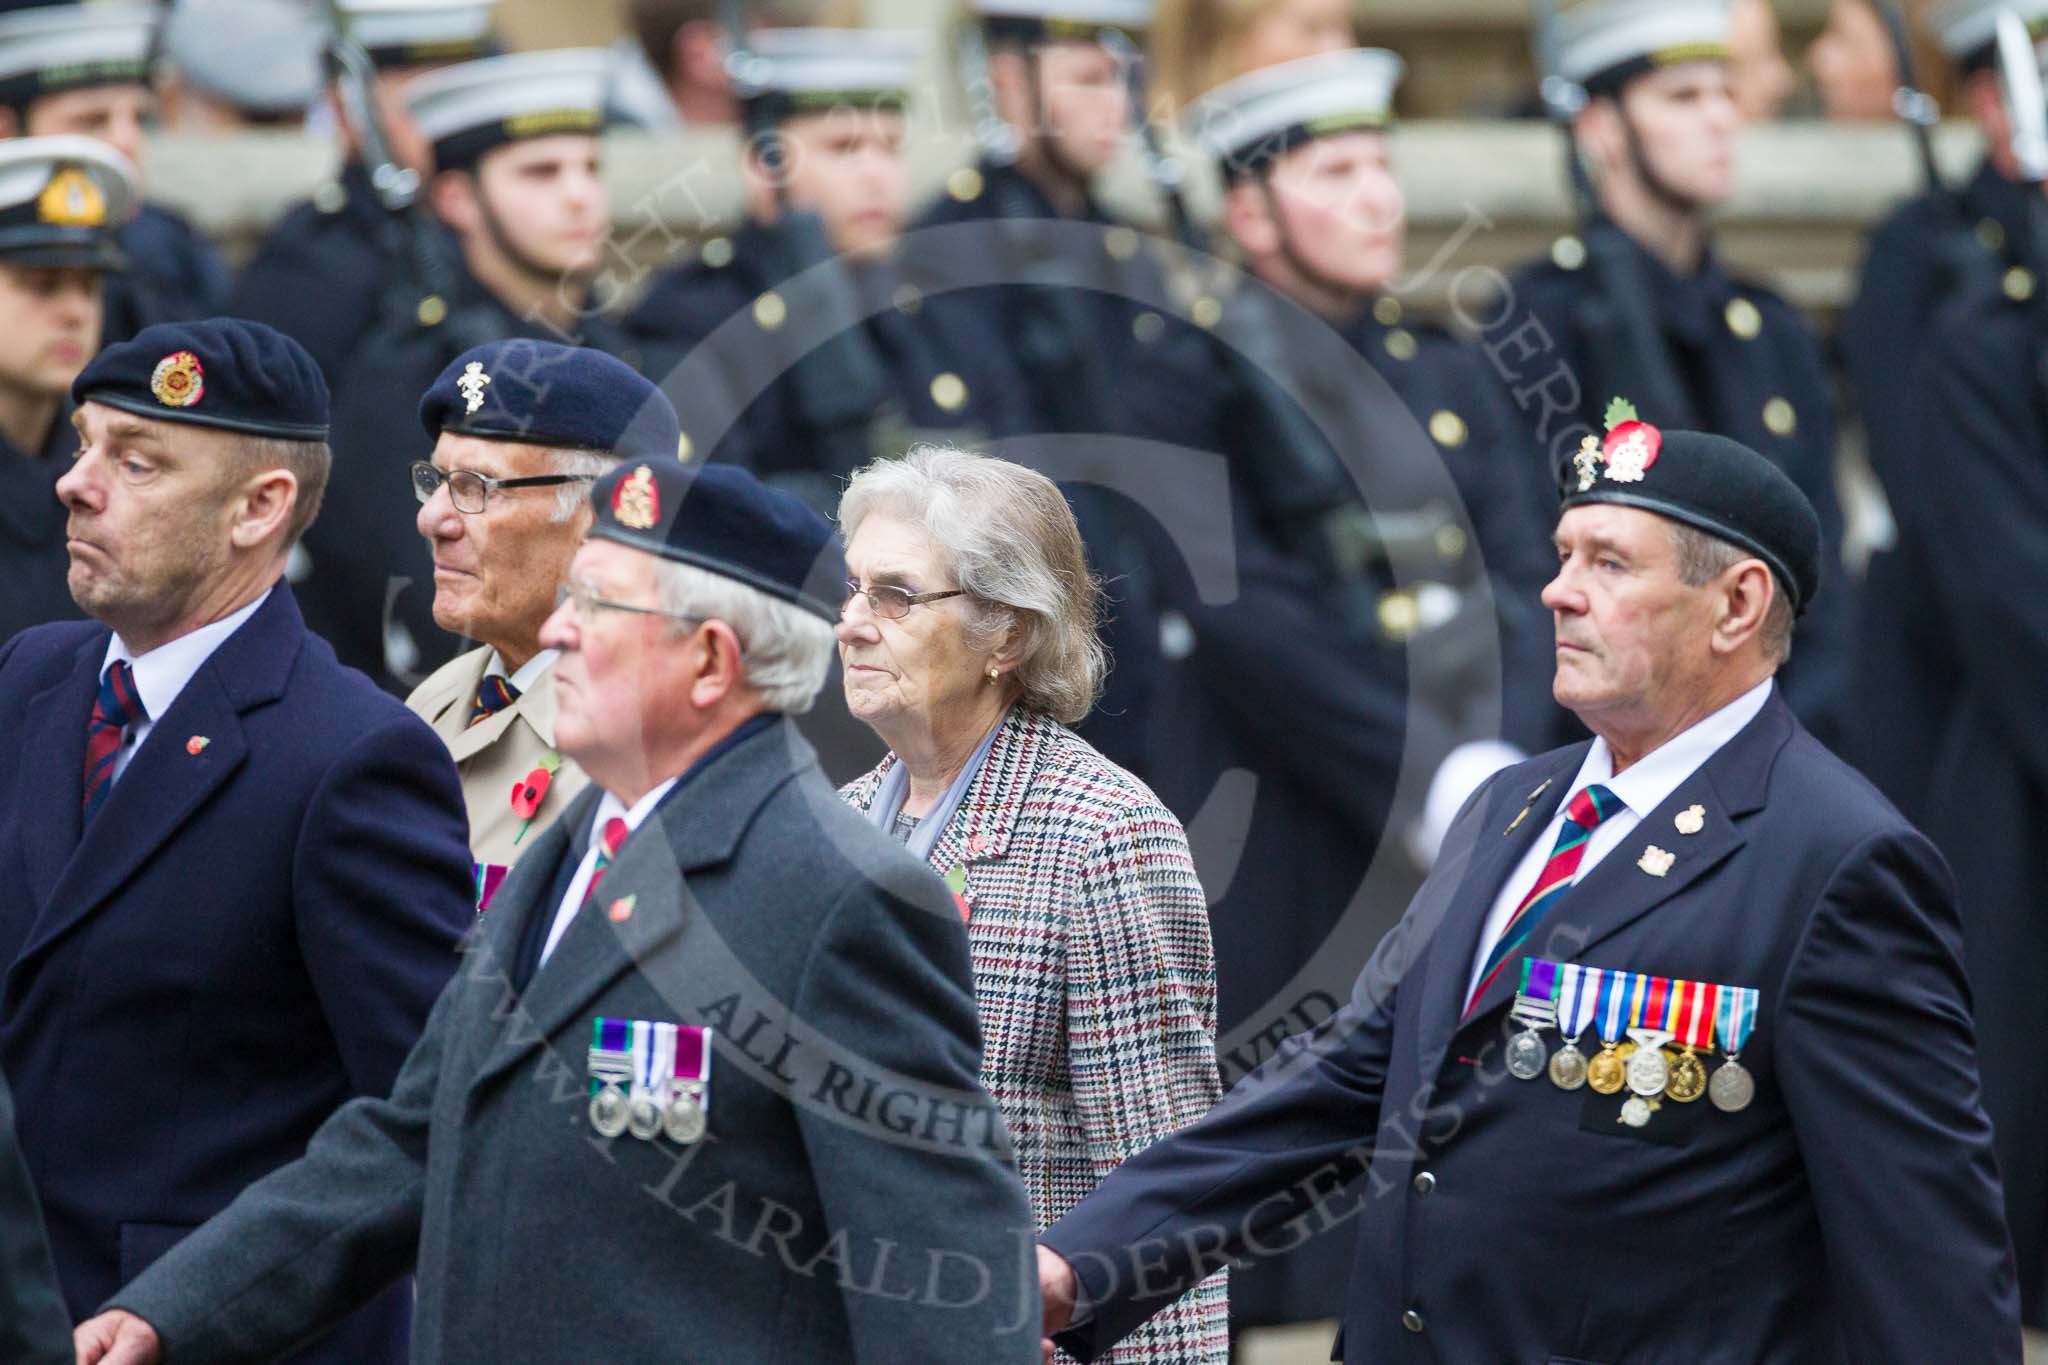 Remembrance Sunday at the Cenotaph 2015: Group B31, Beachley Old Boys Association.
Cenotaph, Whitehall, London SW1,
London,
Greater London,
United Kingdom,
on 08 November 2015 at 11:42, image #247